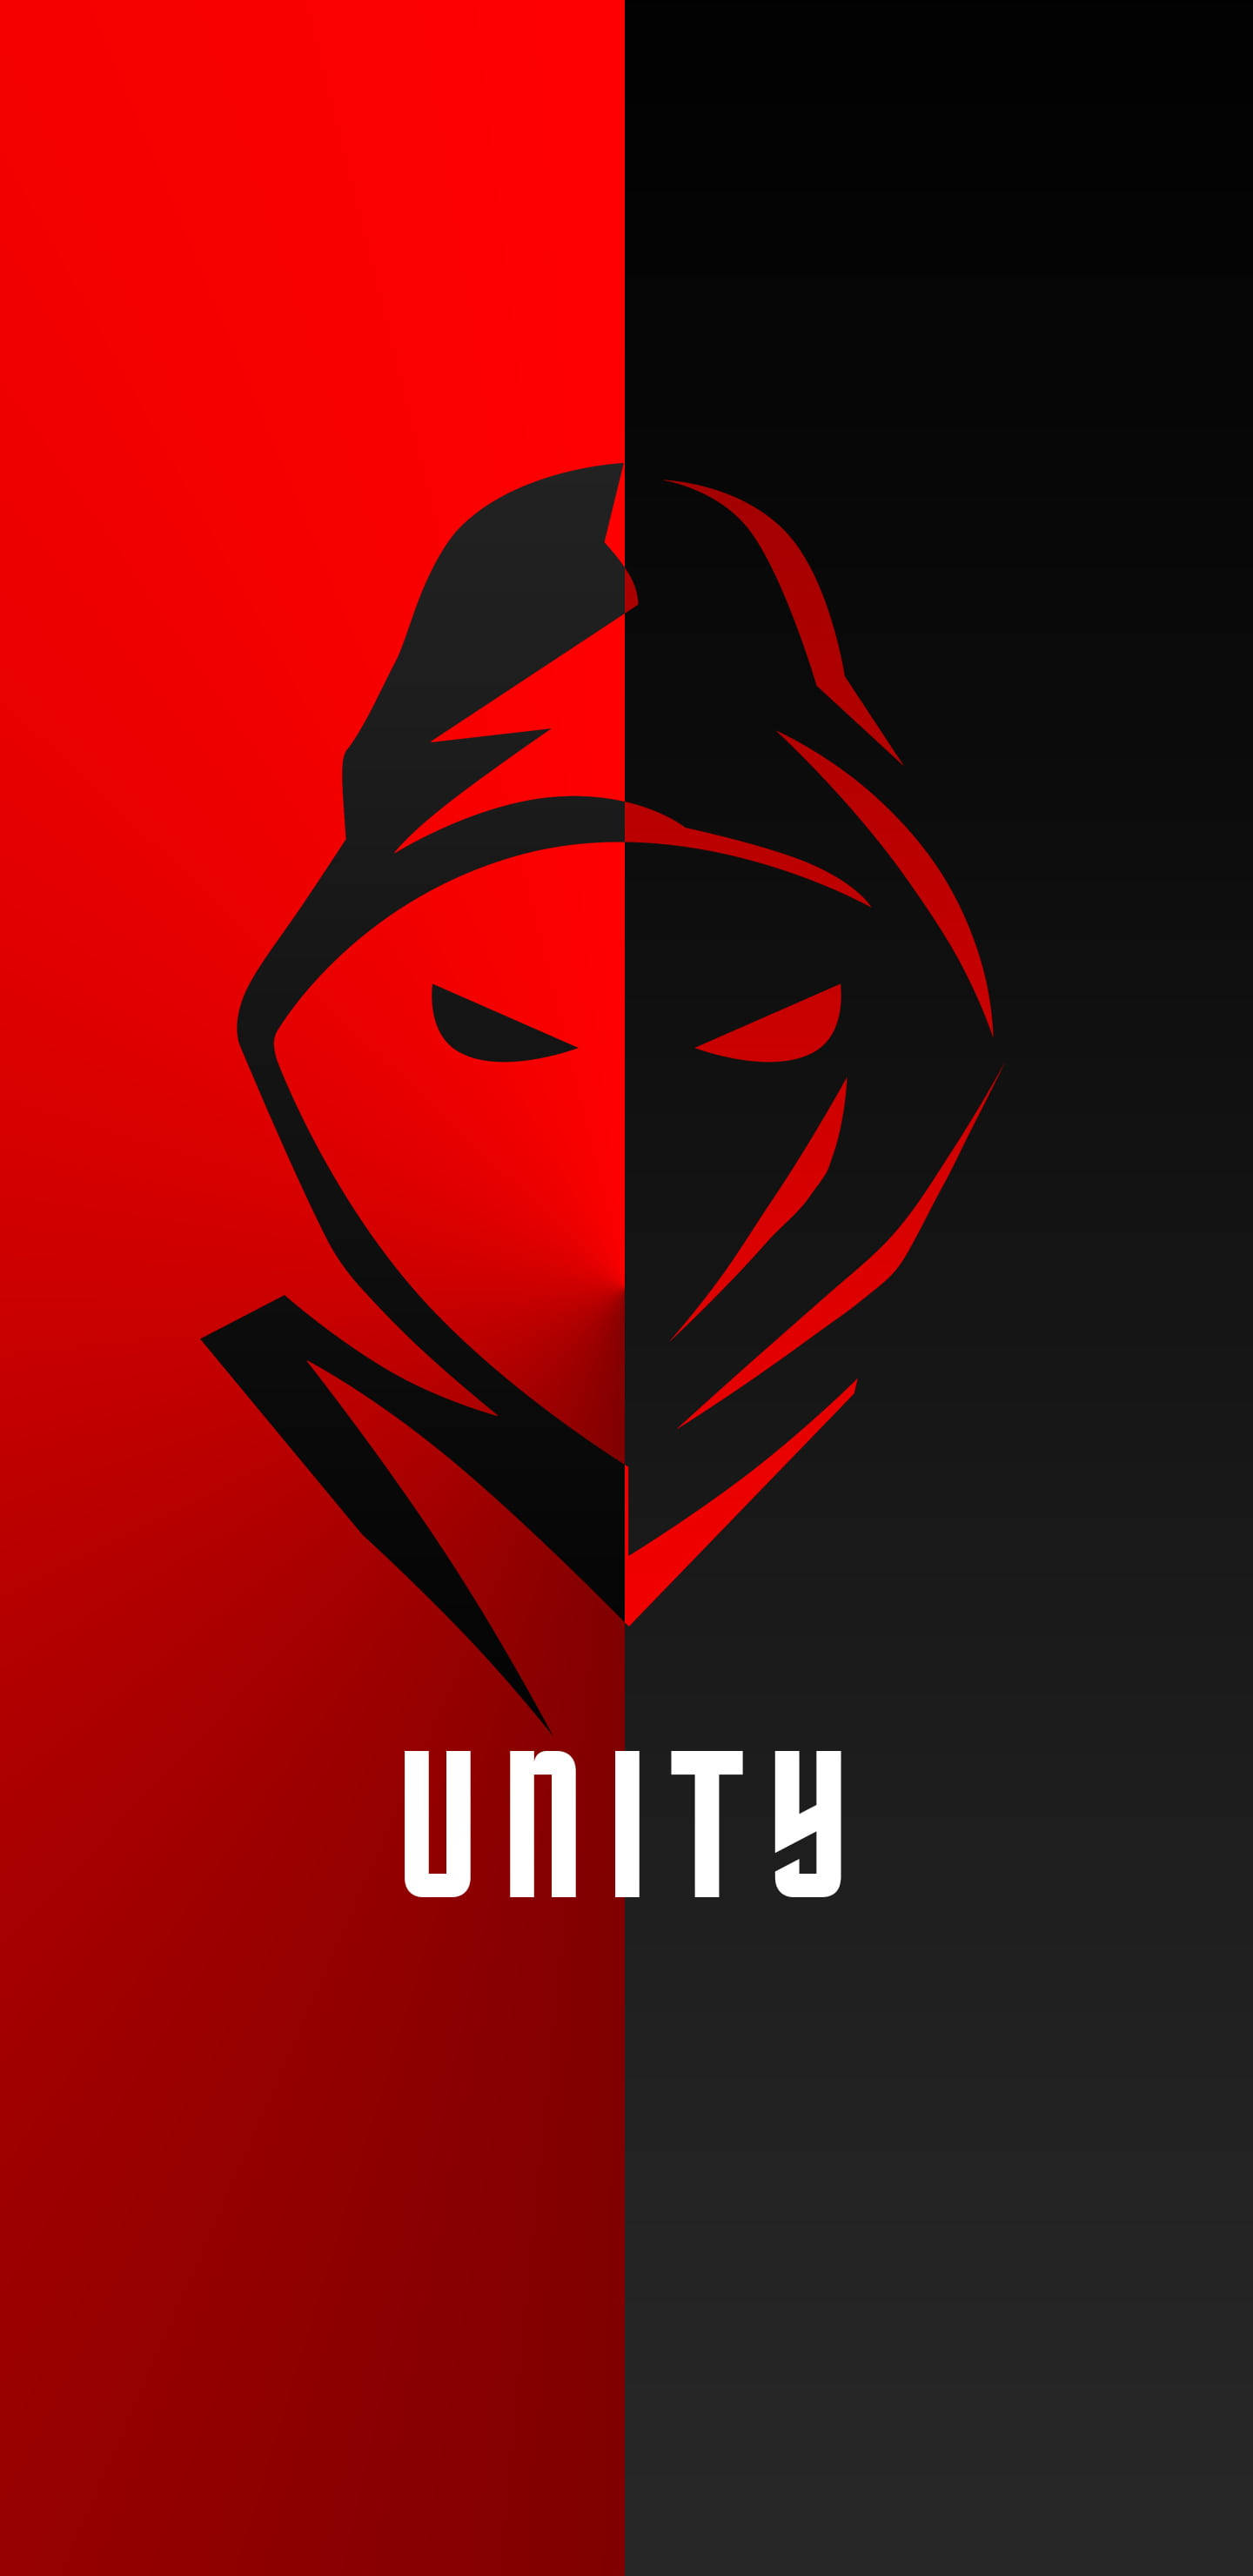 Unity Black And Red Gaming Wallpaper